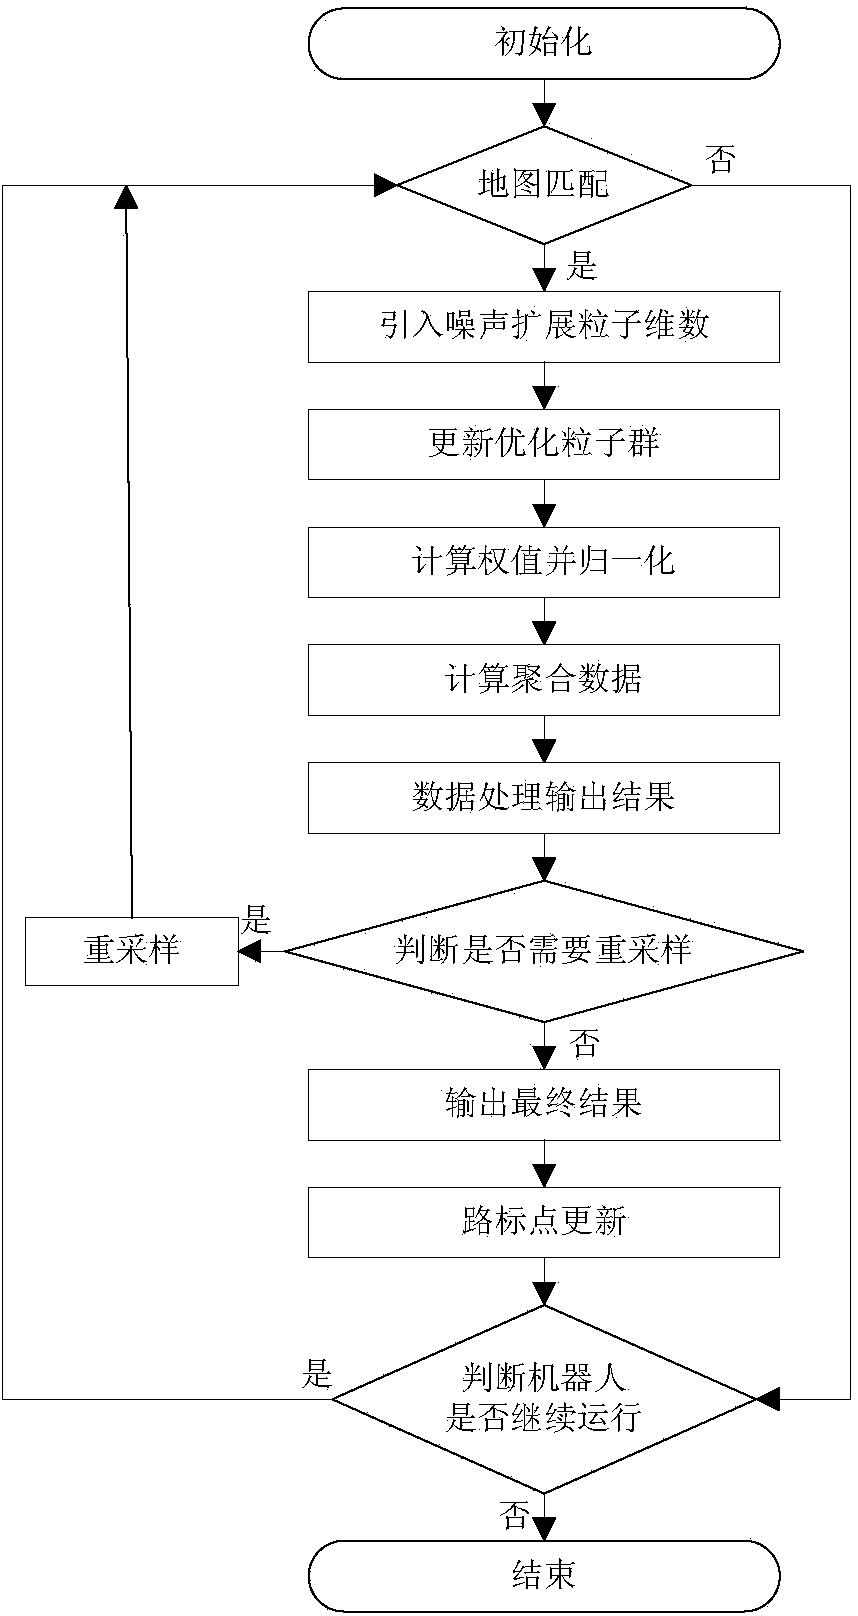 Simultaneous localization and mapping method based on distributed edge unscented particle filter